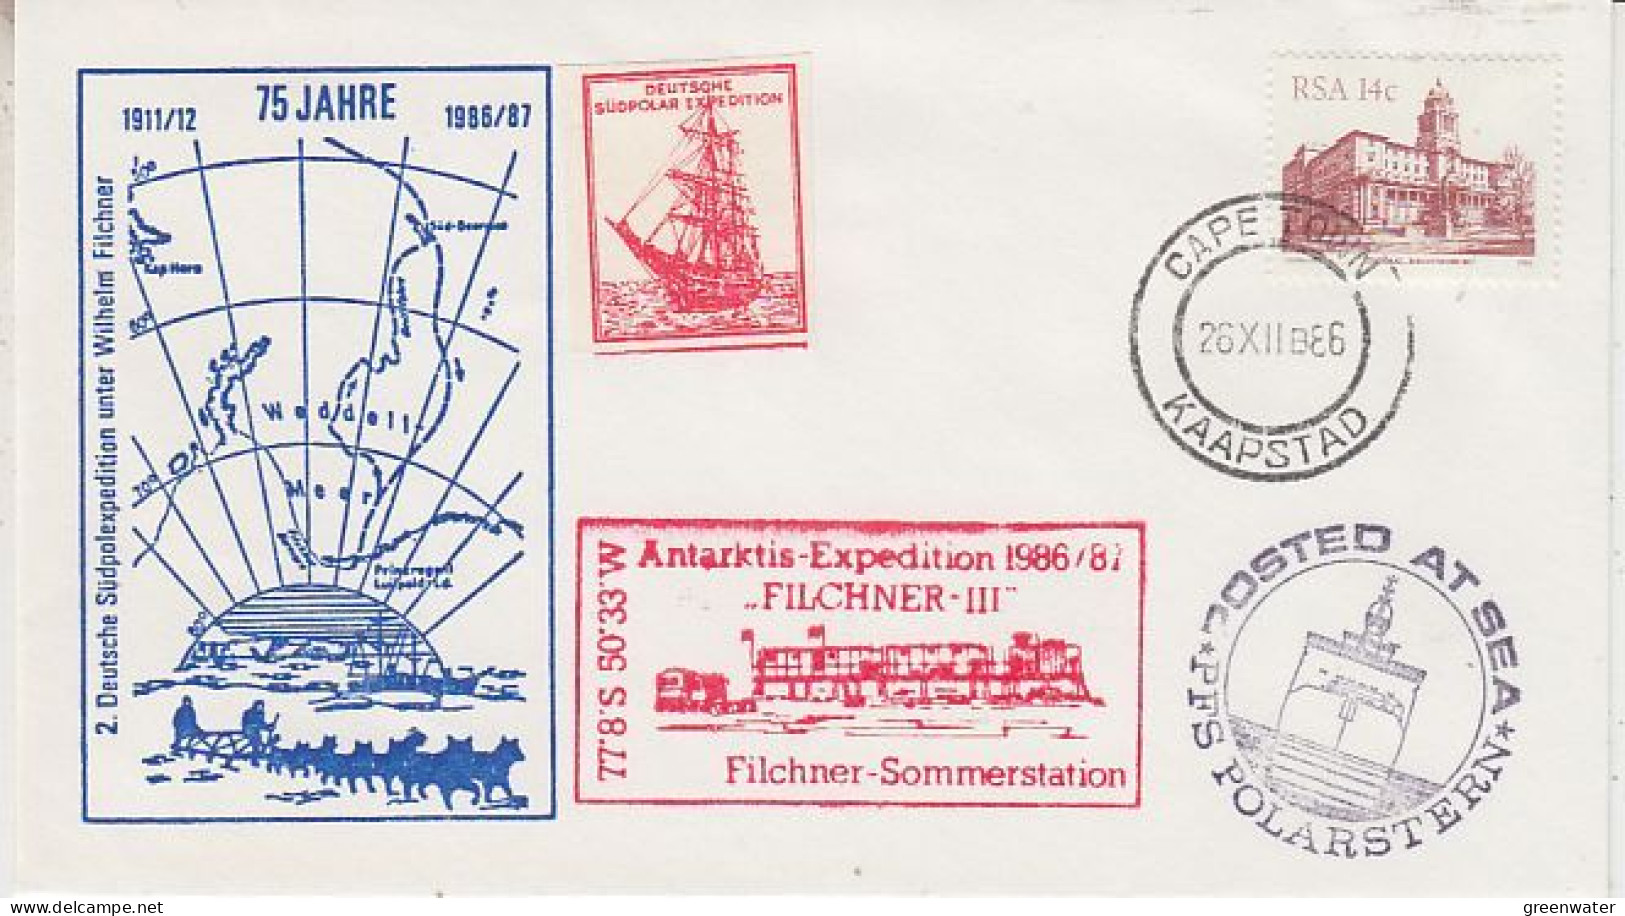 South Africa Antarktis Expedition 1986/87 Filchner III Label Deutsche Ant. Expo Ca Cape Town 26.12.1986 (GS213) - Antarctic Expeditions